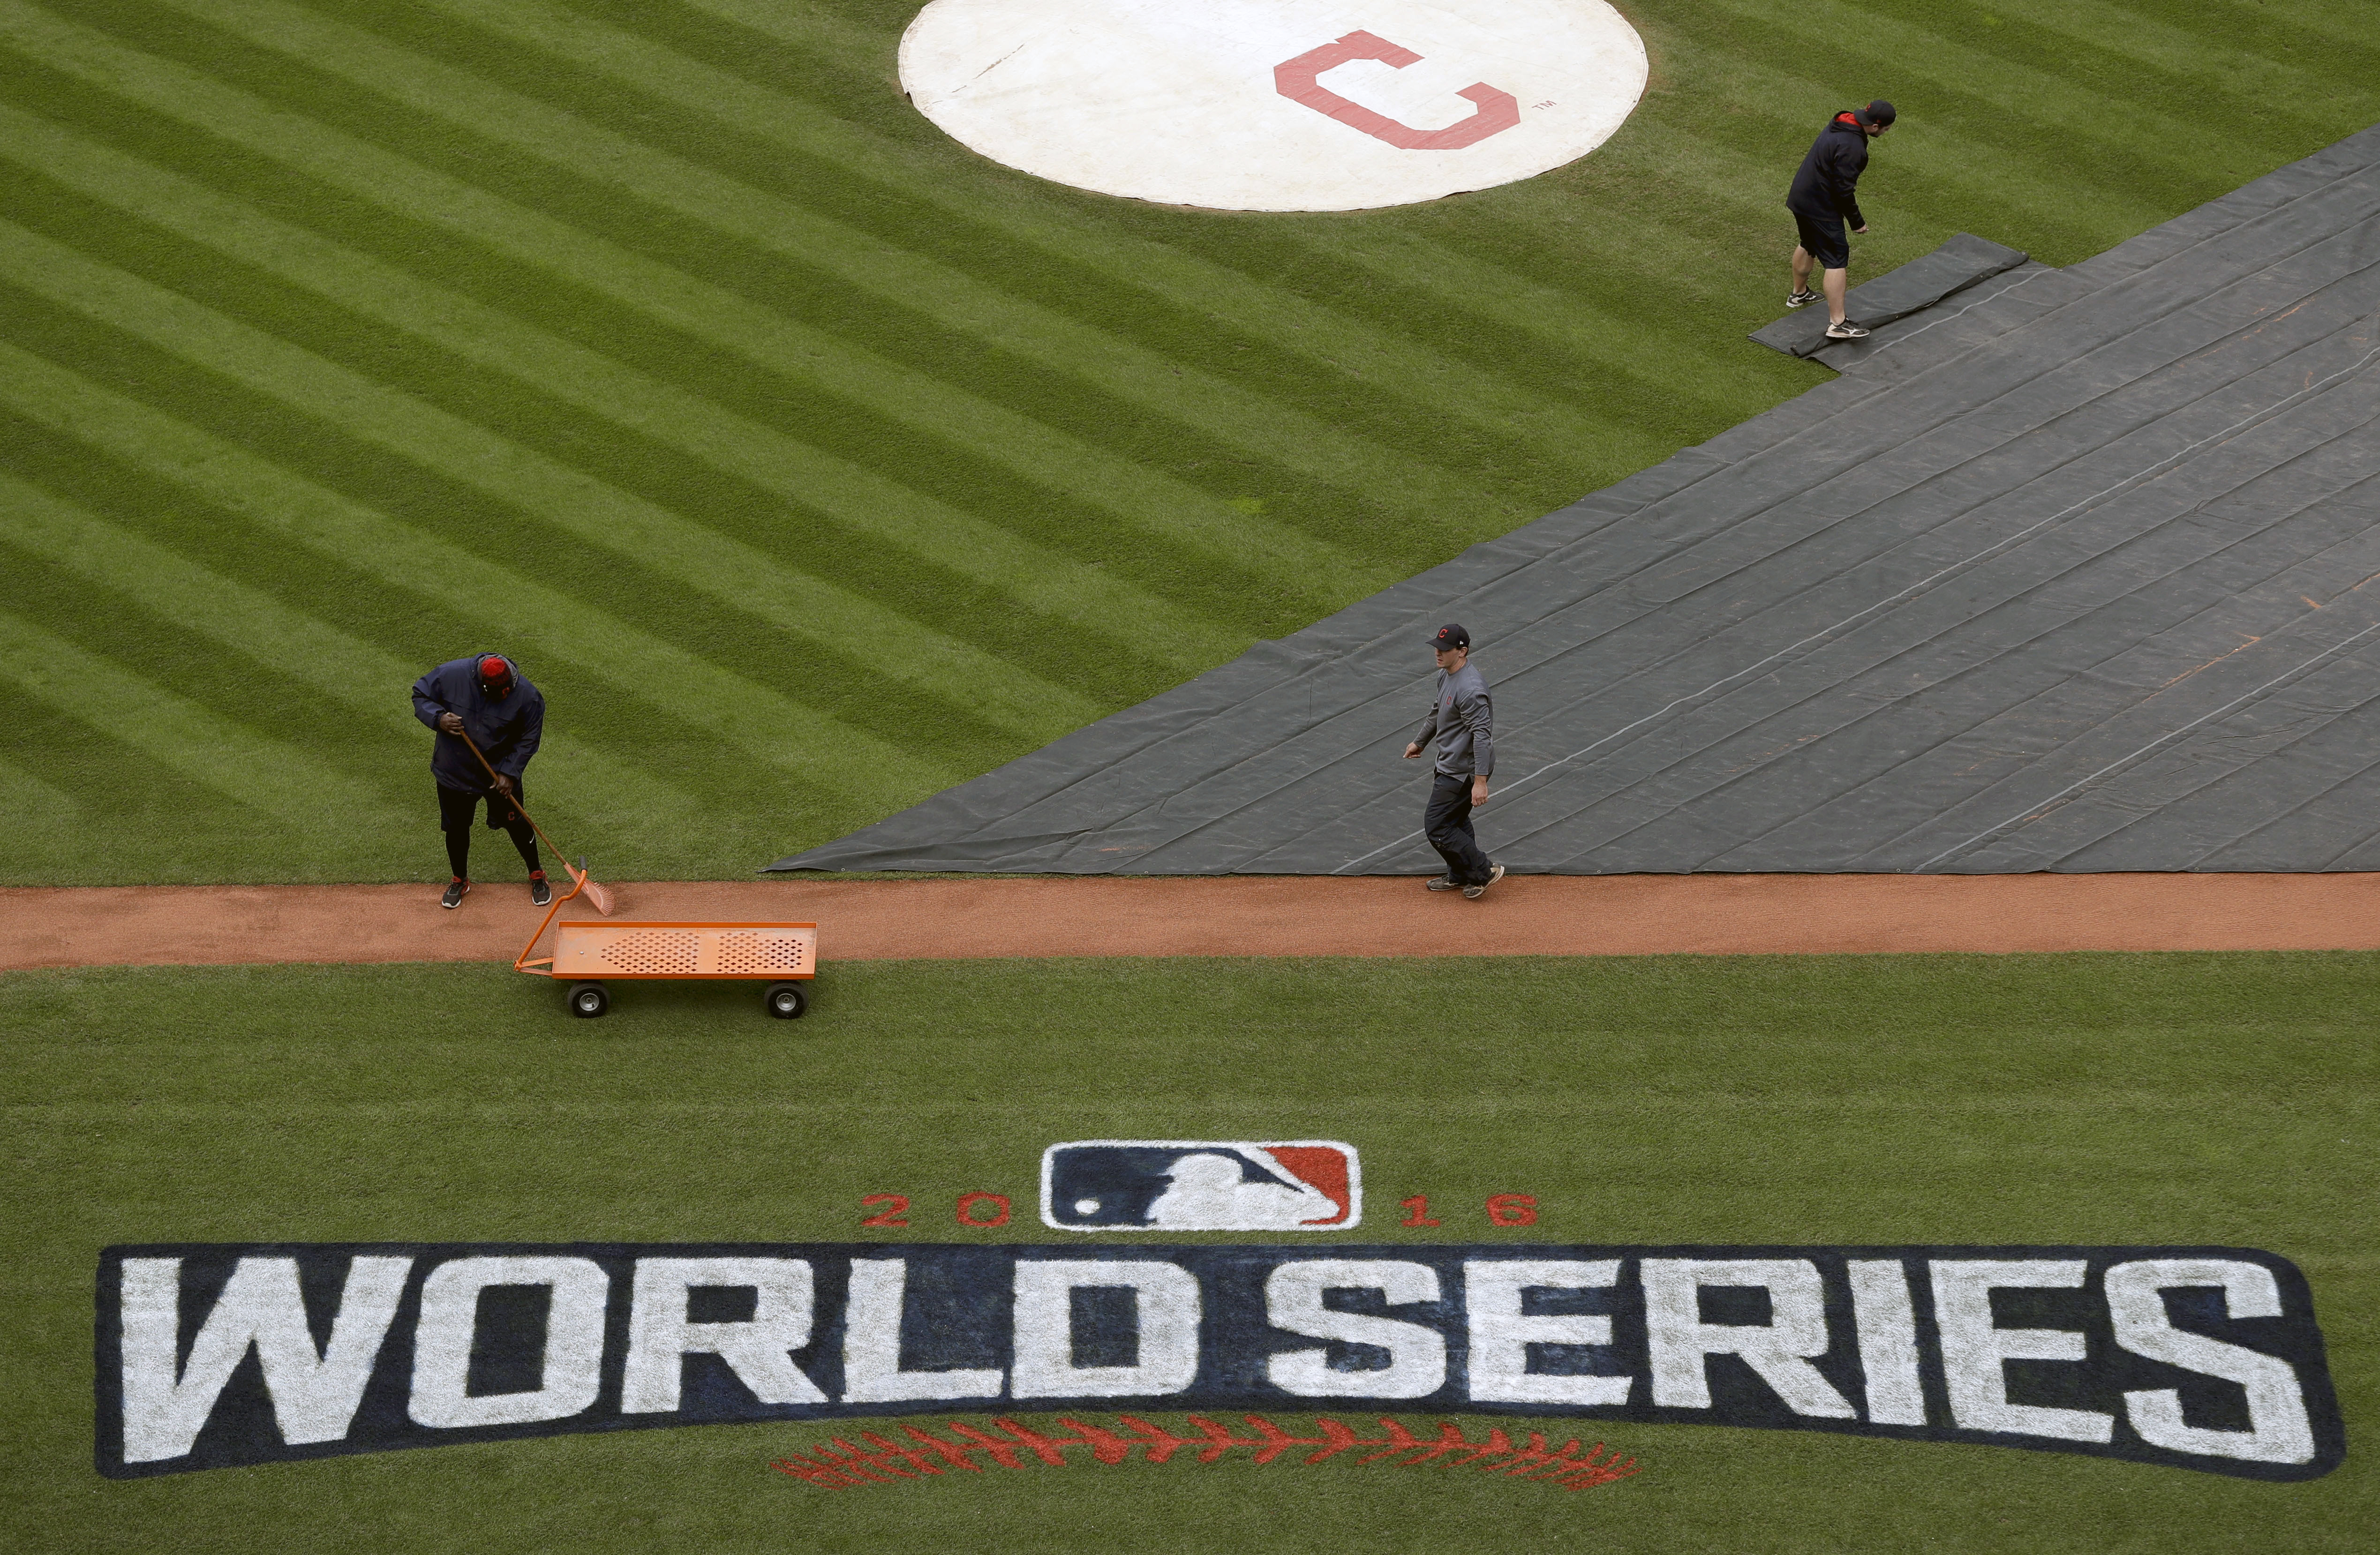 Inside MLB's Virtual Ads at the World Series